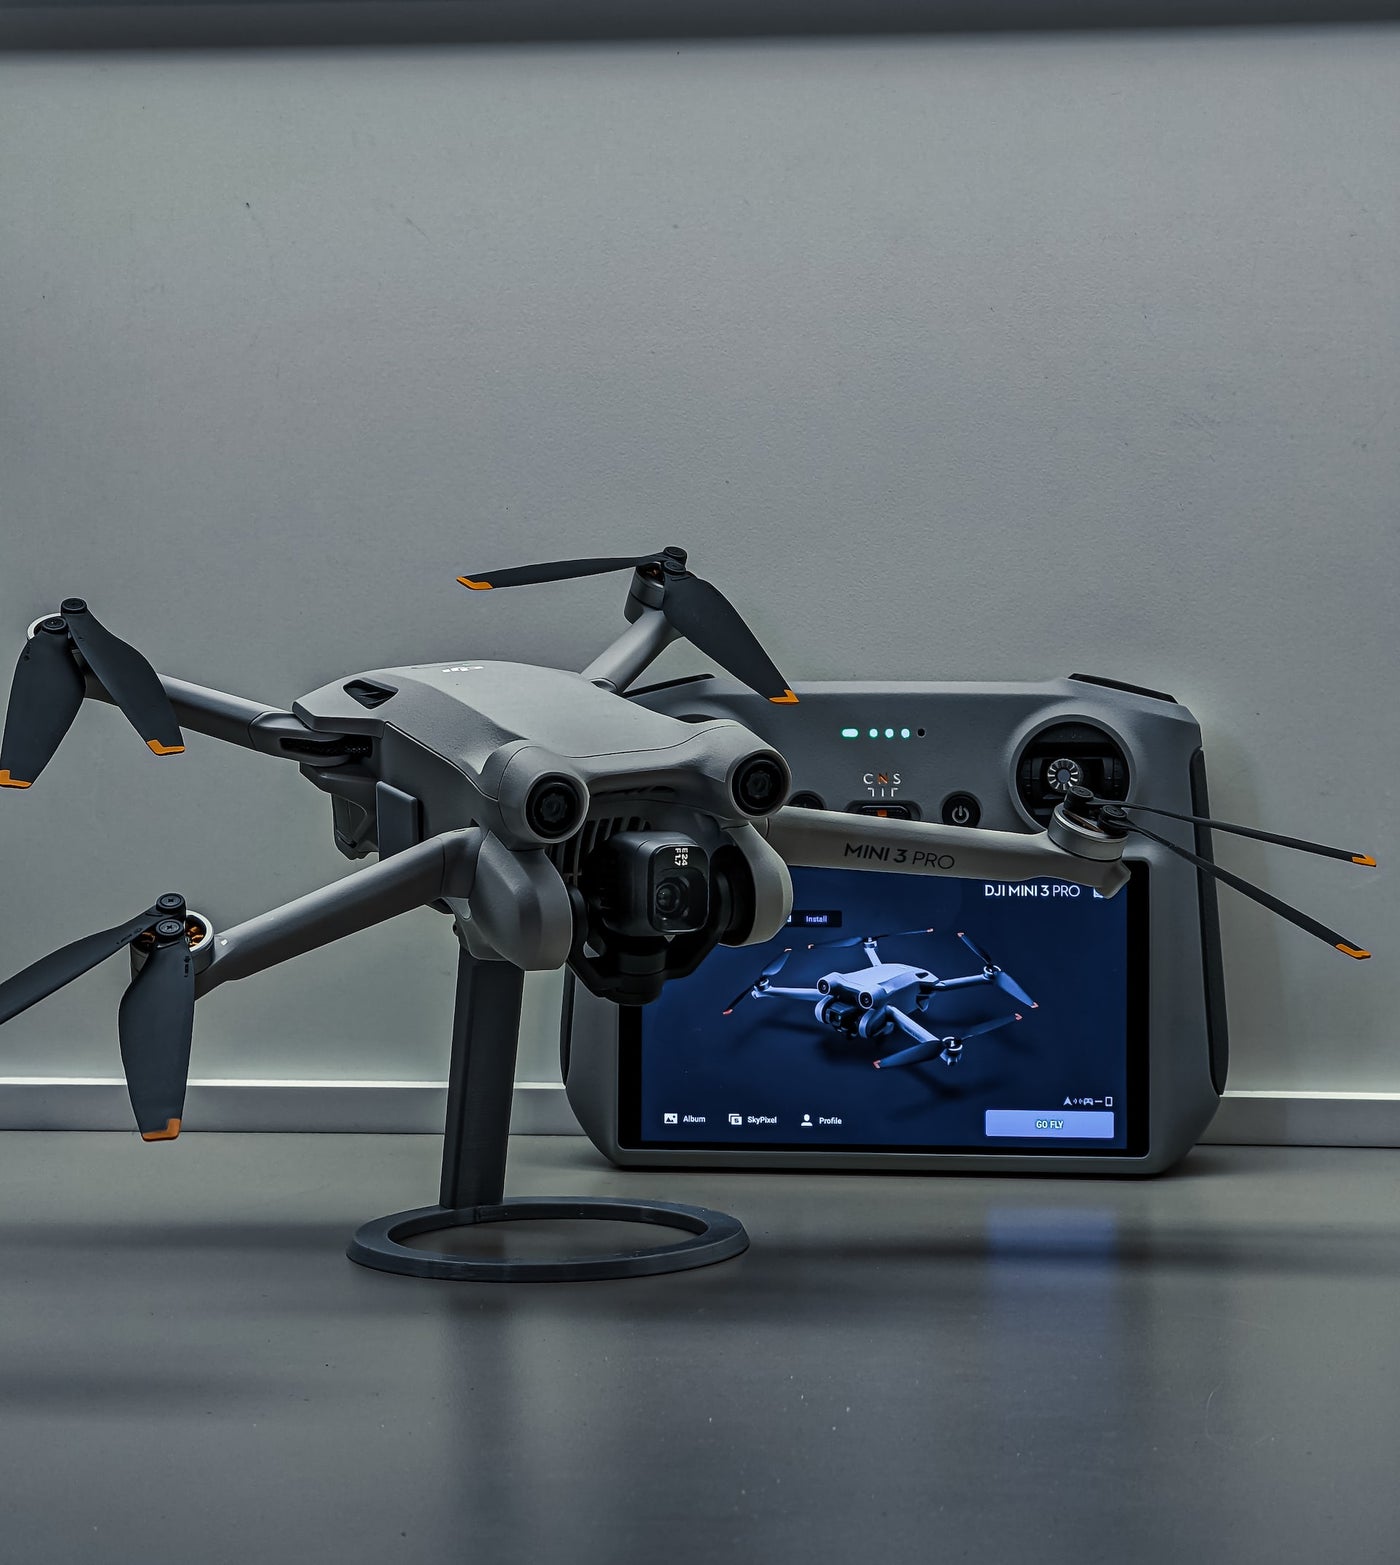 The Top 10 Benefits and Uses of Drones in 2023